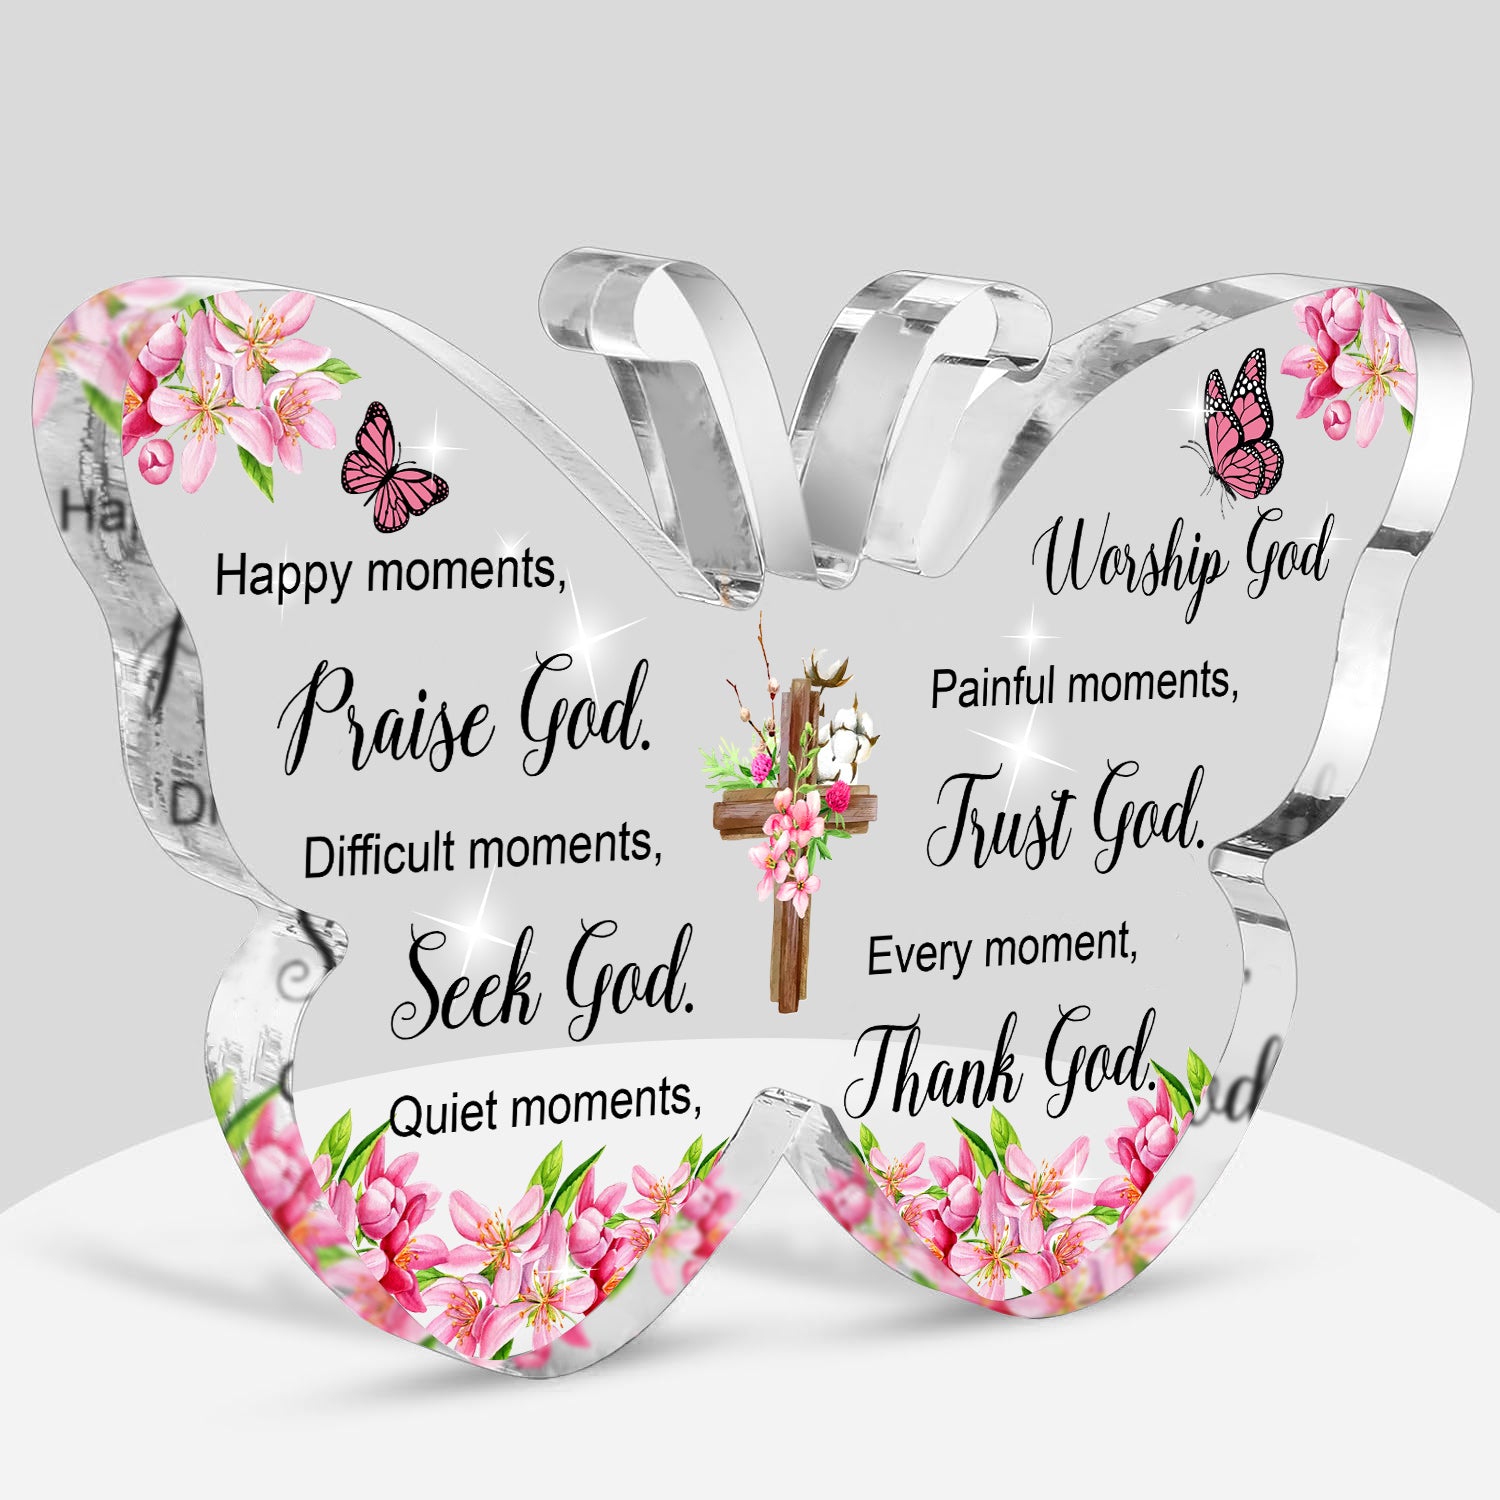 Every moment Butterfly Shaped Acrylic Plaque Christian Gifts Religious Gifts Inspirational Gifts with Bible Verse Prayers